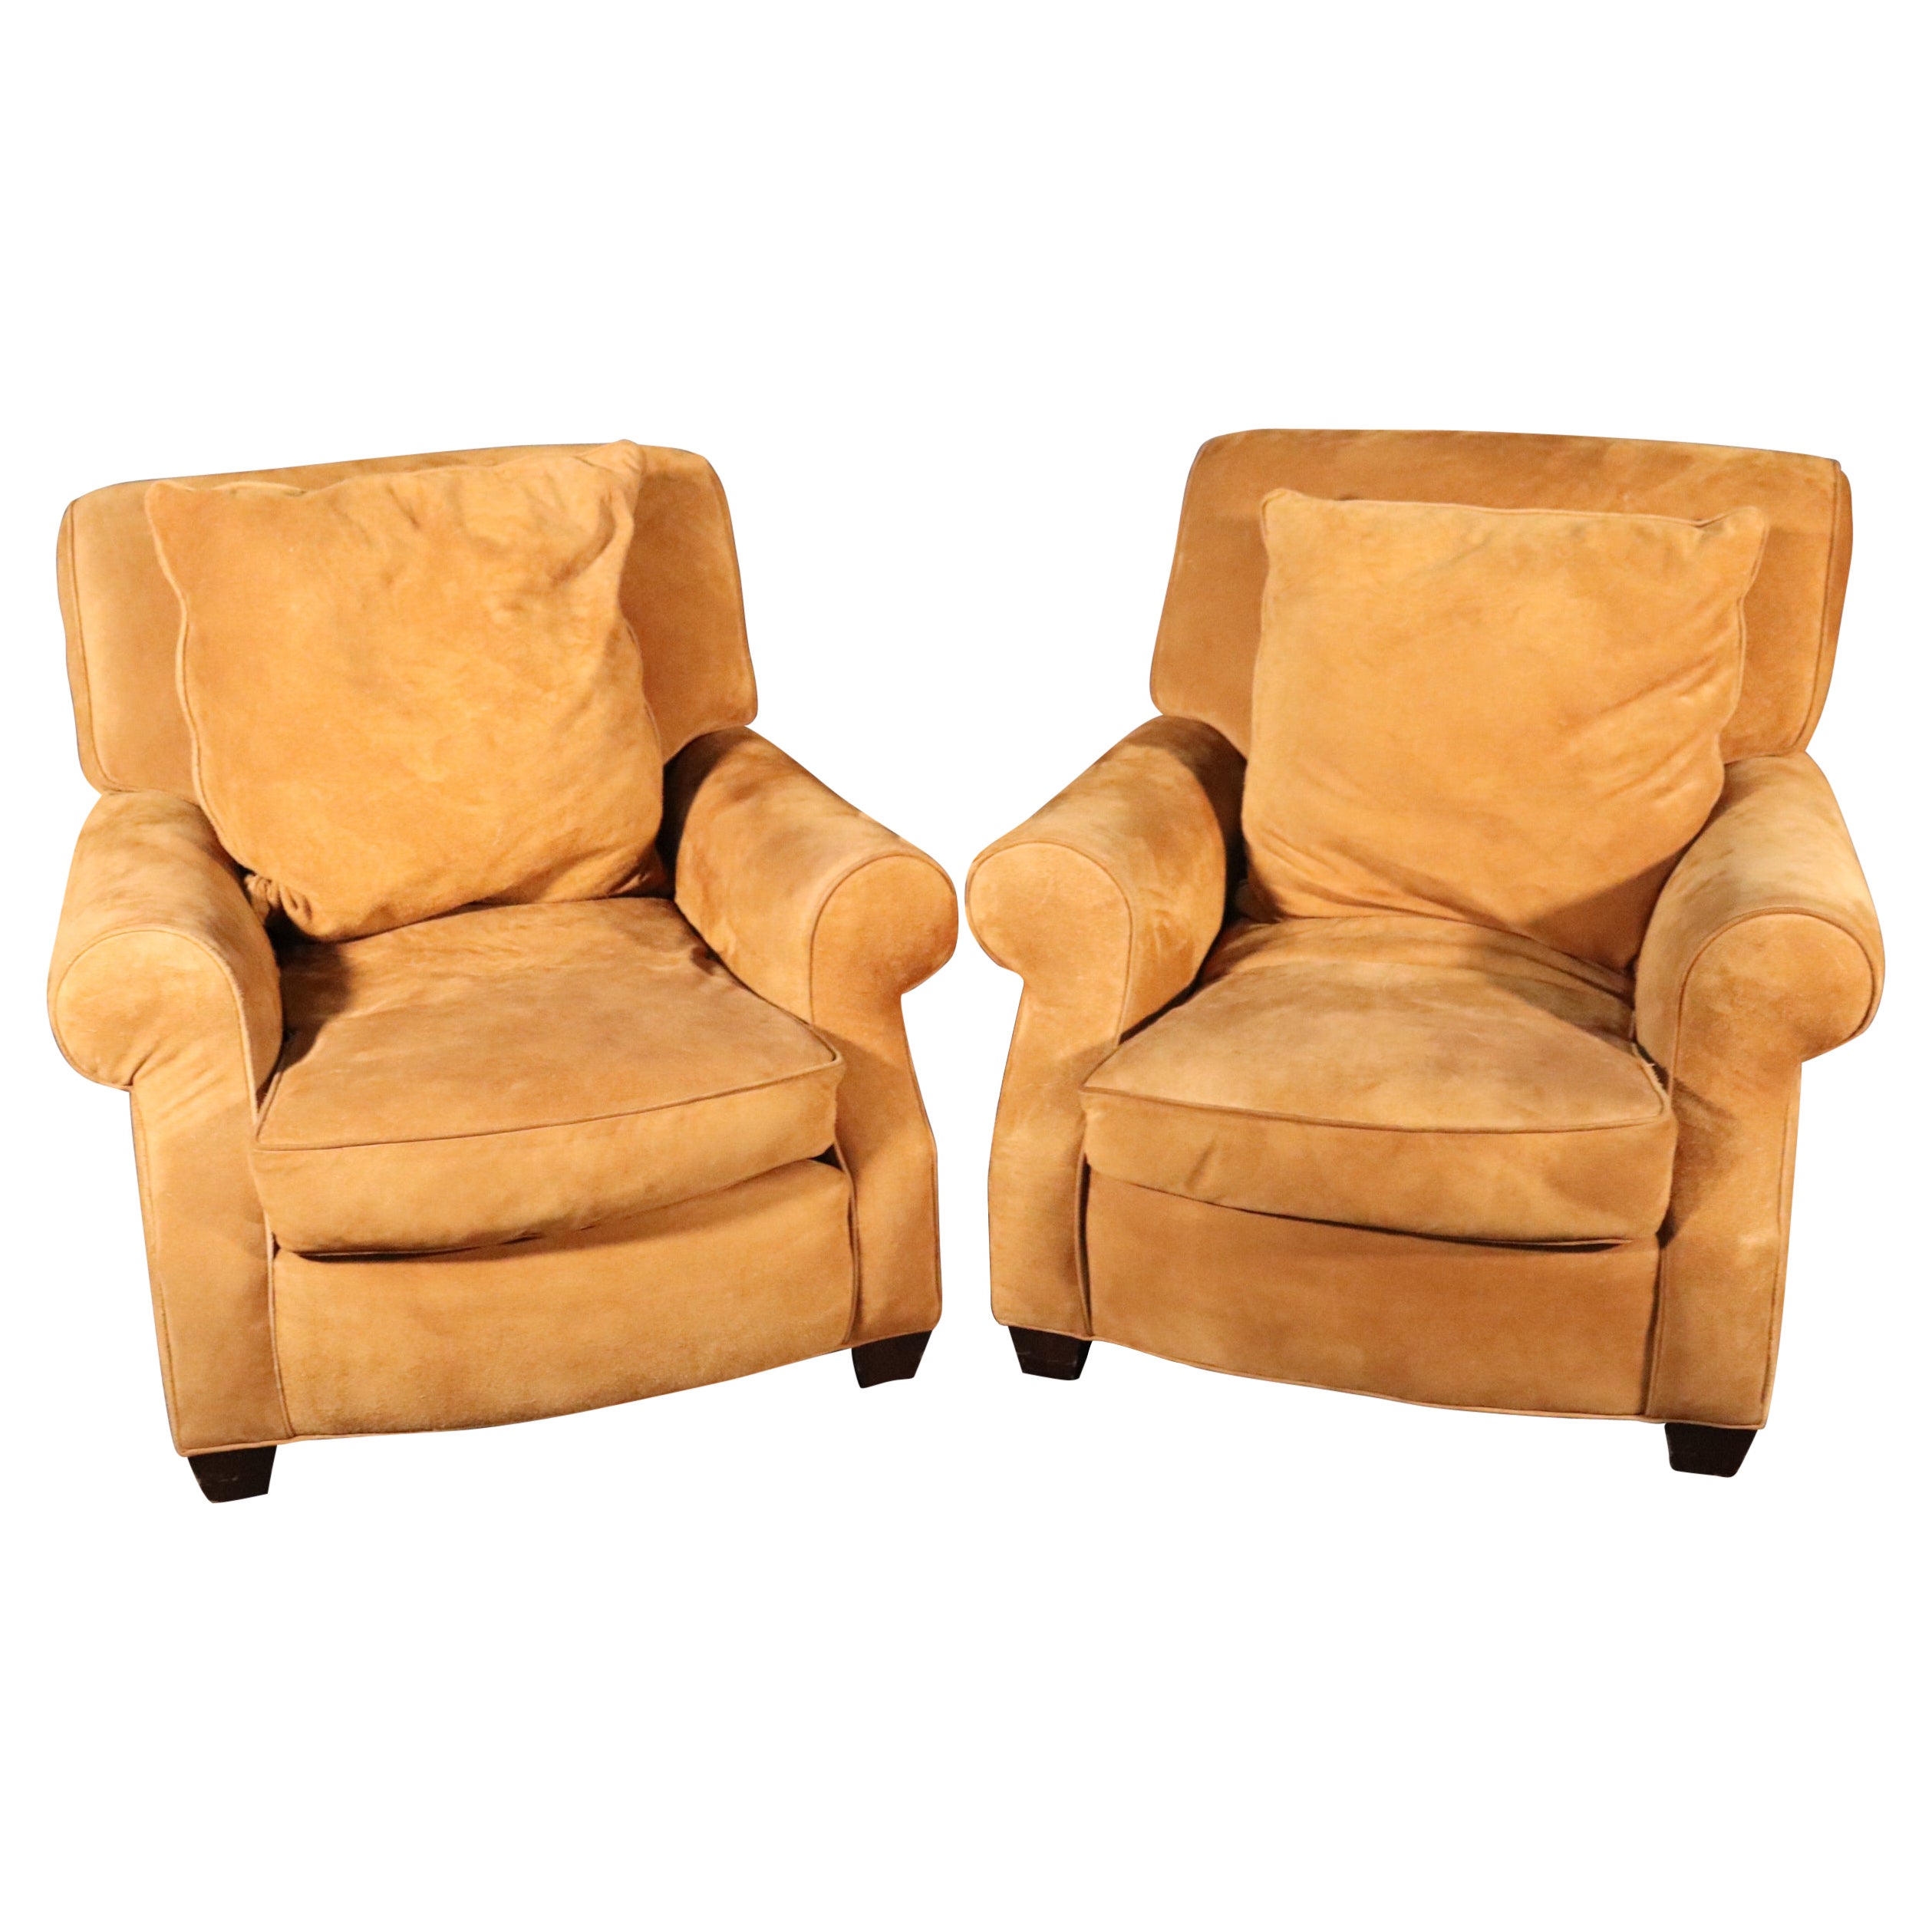 Pair of Sand Hued Genuine Suede Large Scale Williams Sonoma Club Chairs